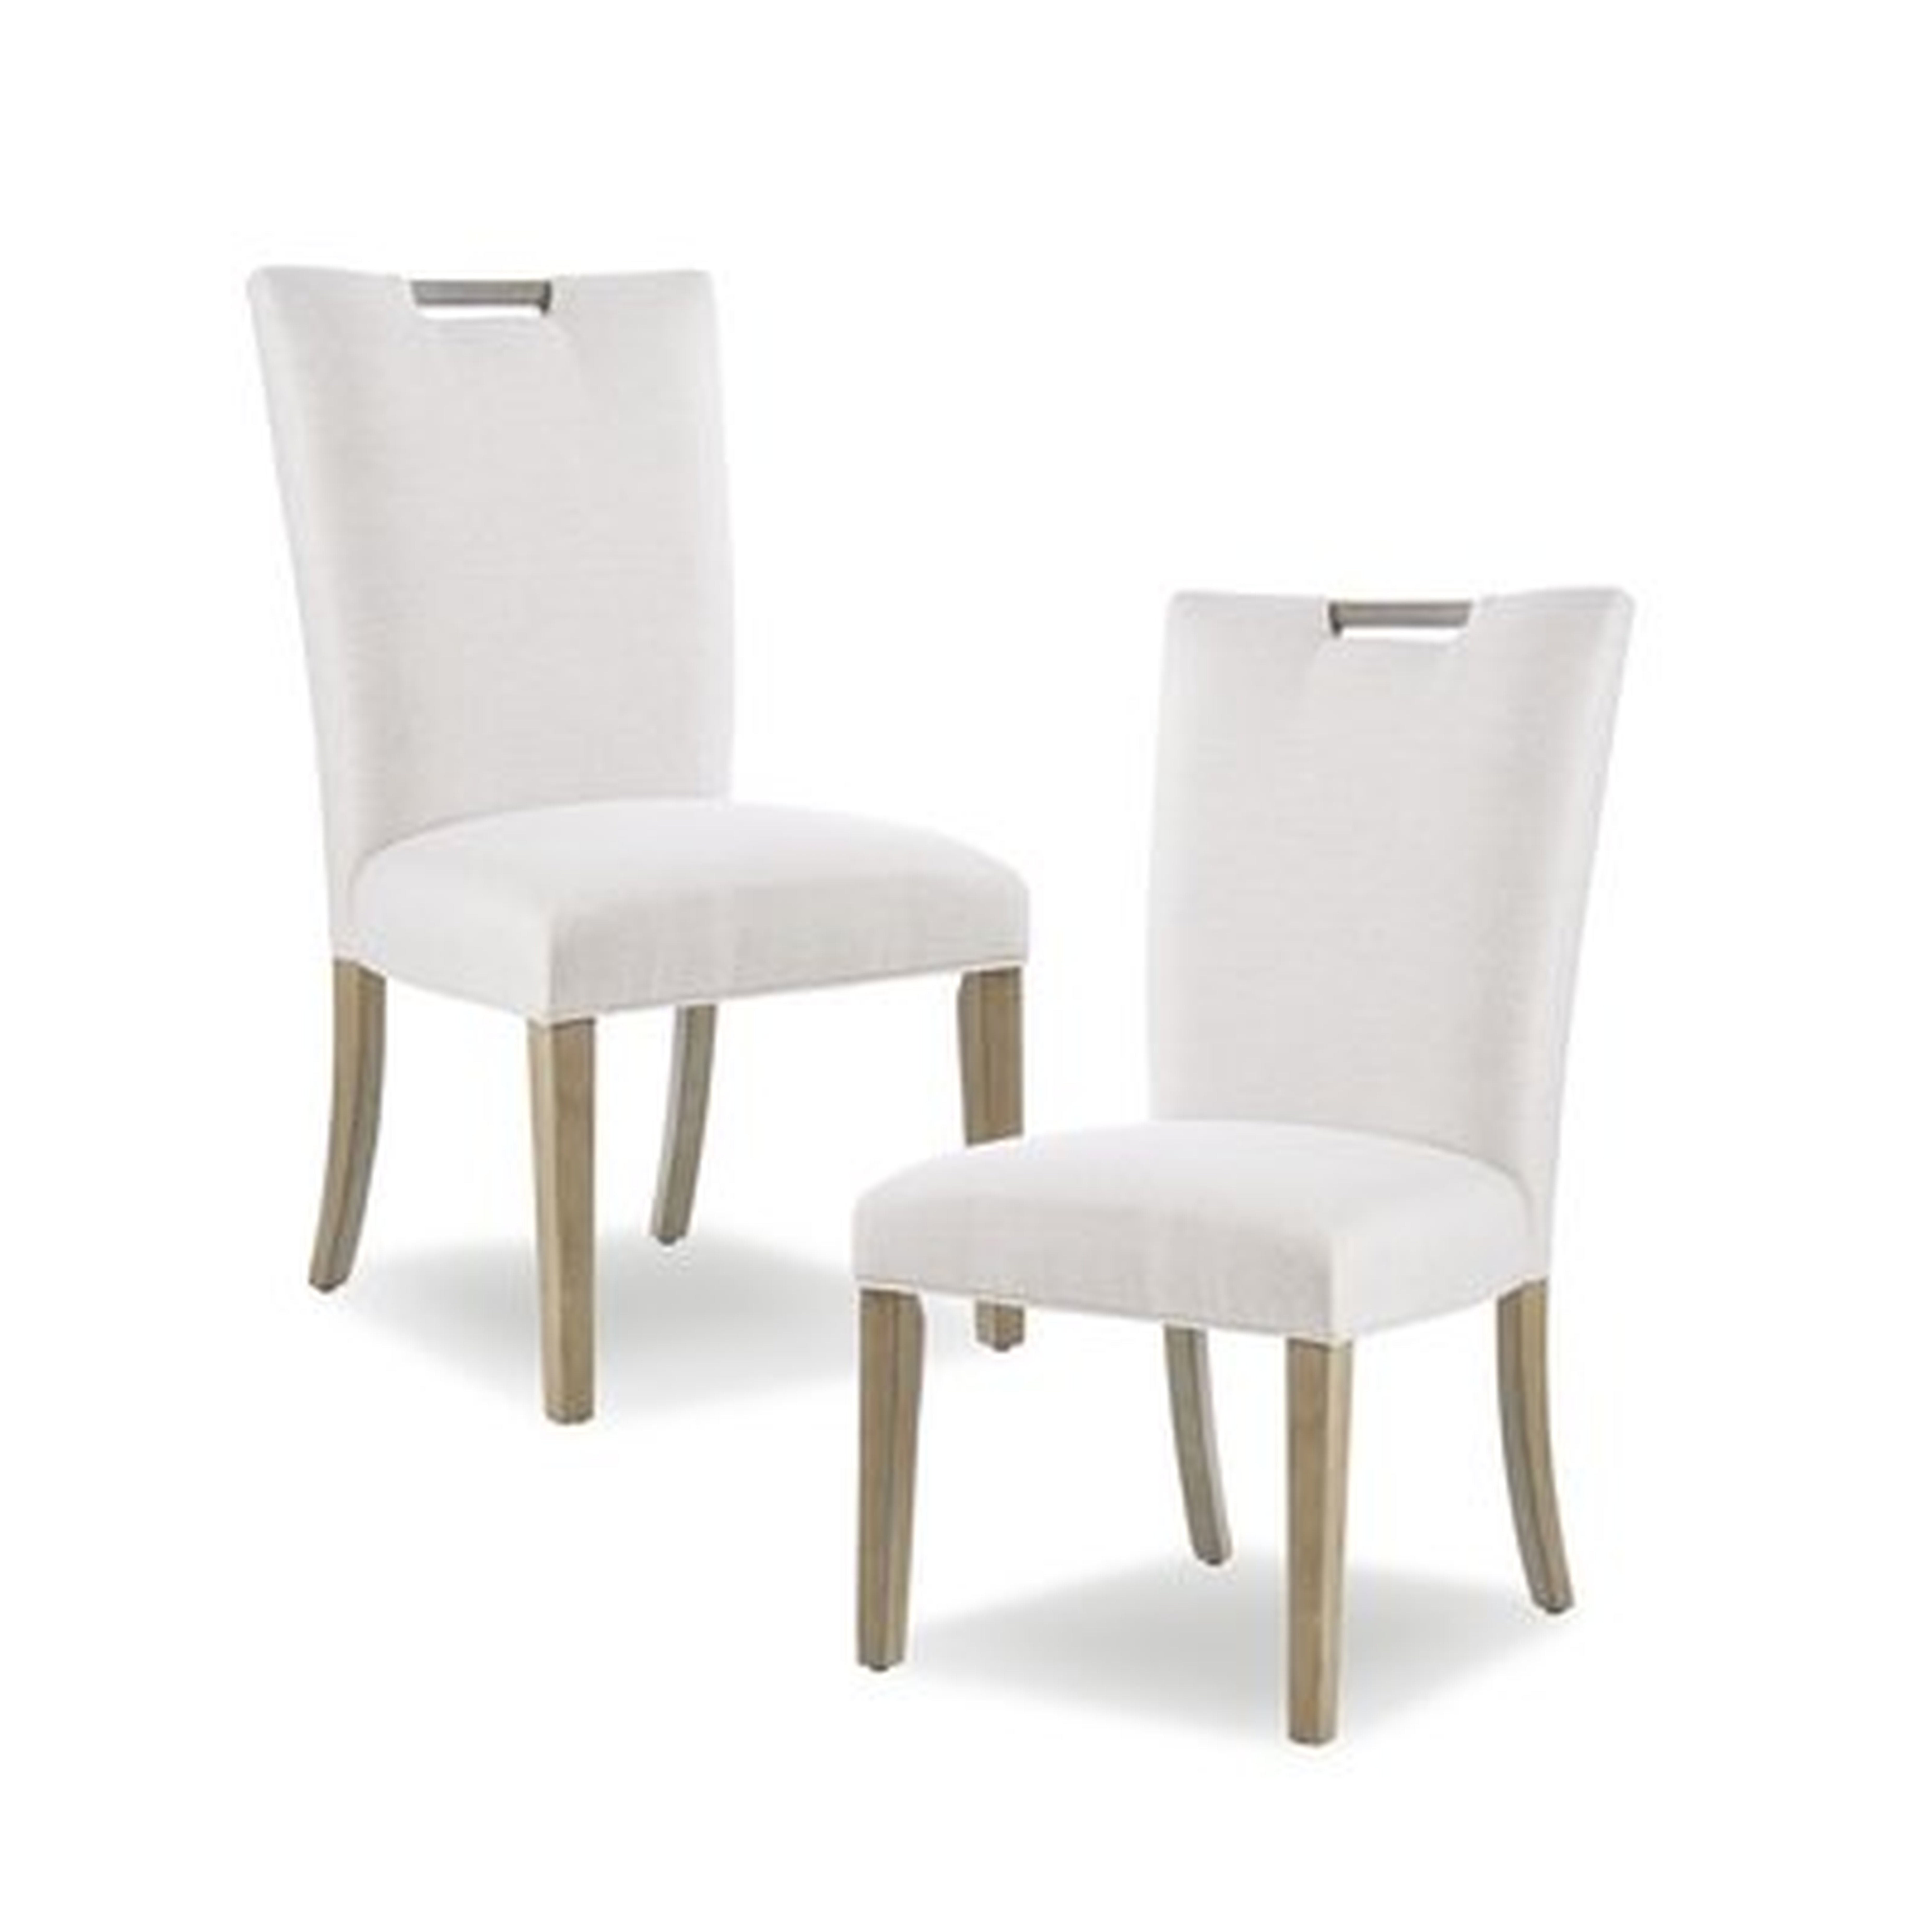 Sledmere Upholstered Dining Chair - Set of 2 - Wayfair